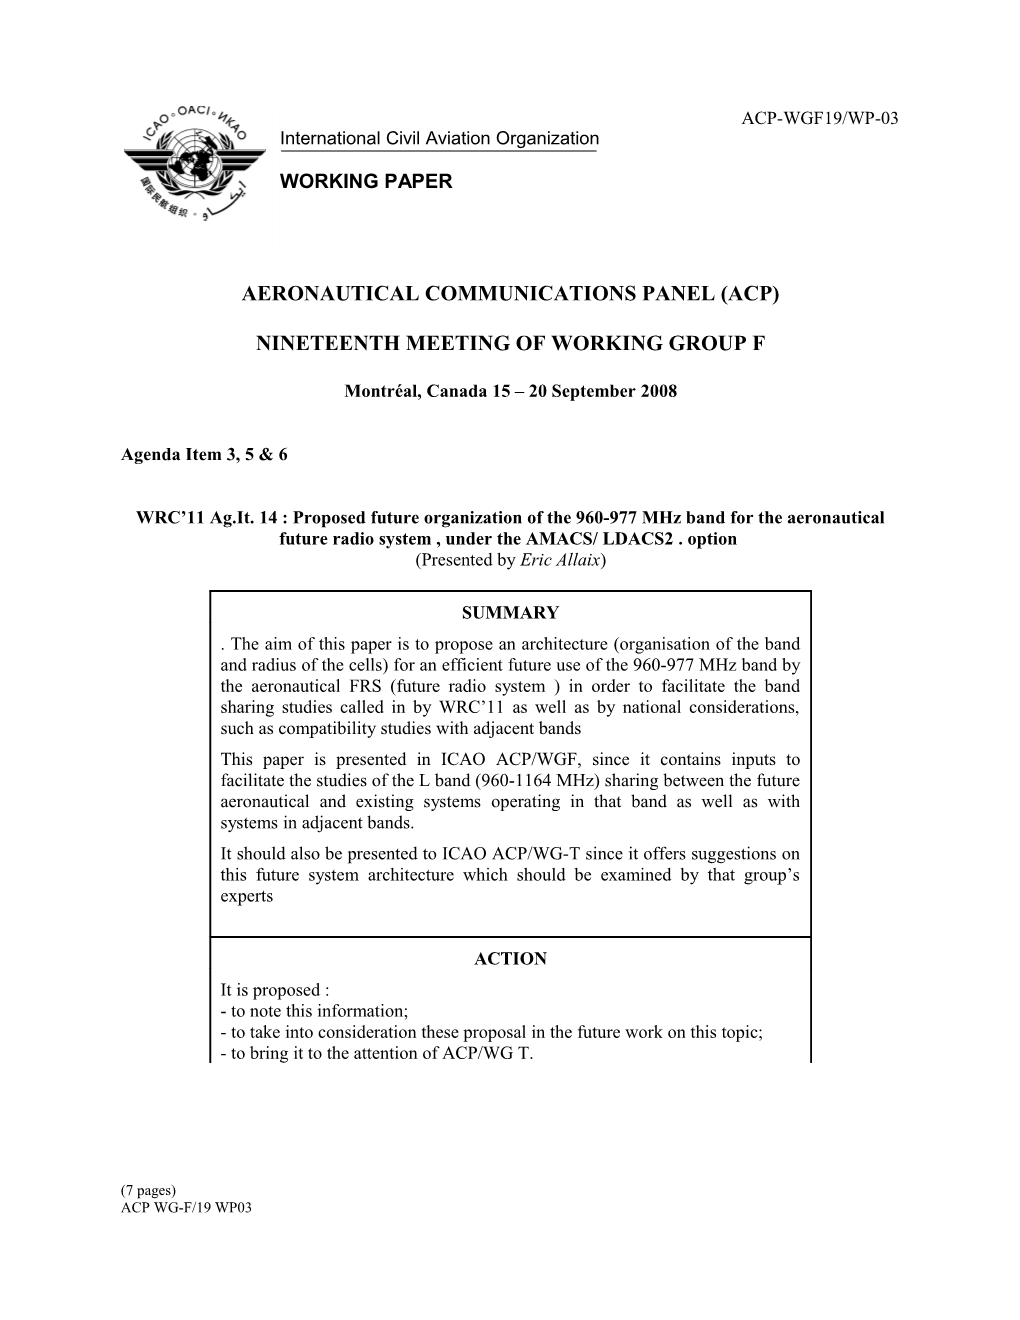 WRC 11 Ag.It. 14 : Proposed Future Organization of the 960-977 Mhz Band for the Aeronautical